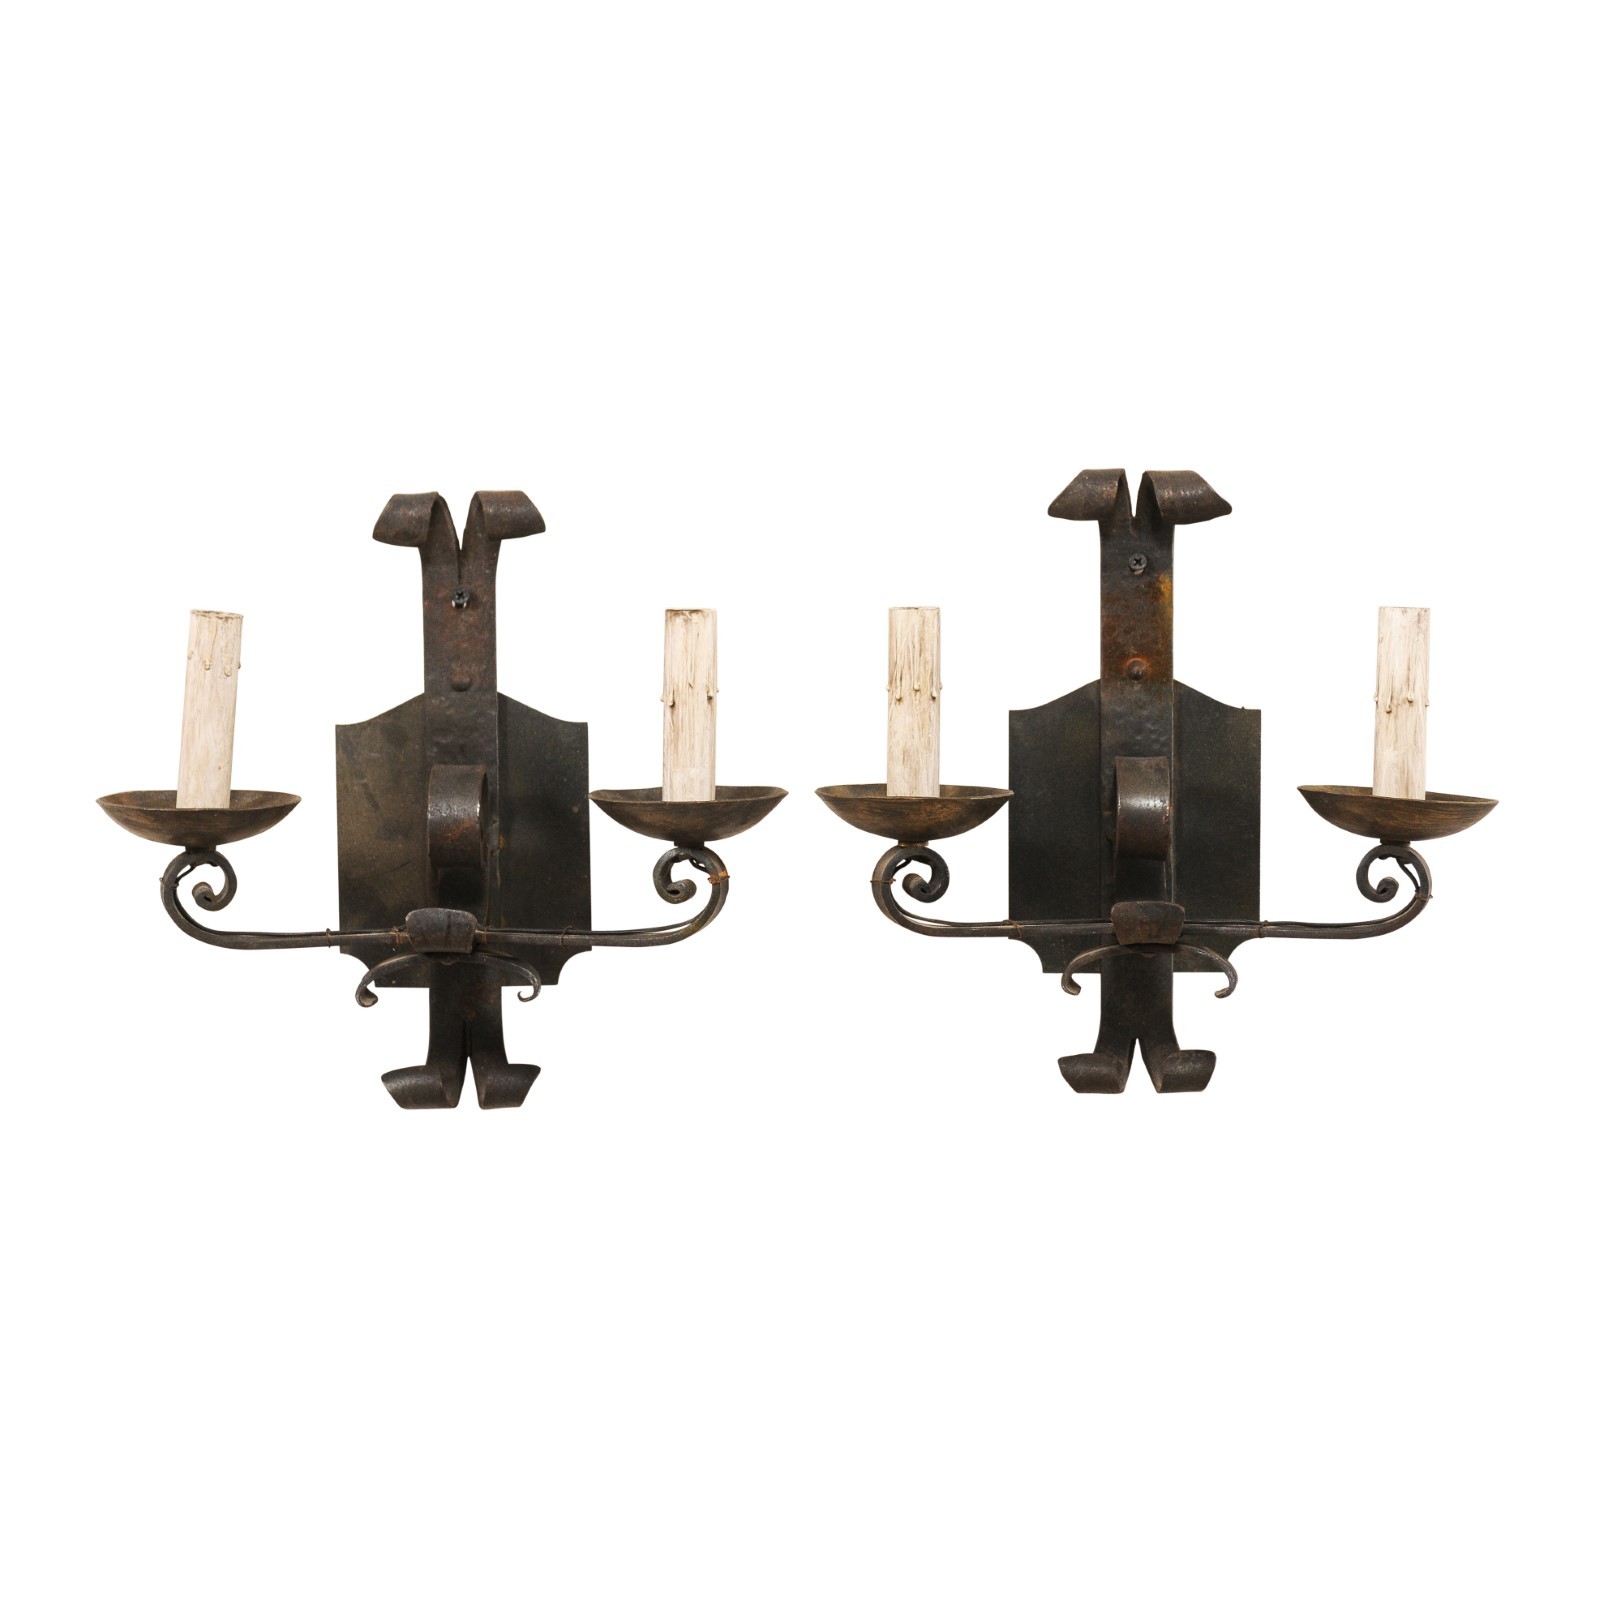 Pair Two-Light Forged-Iron Sconces